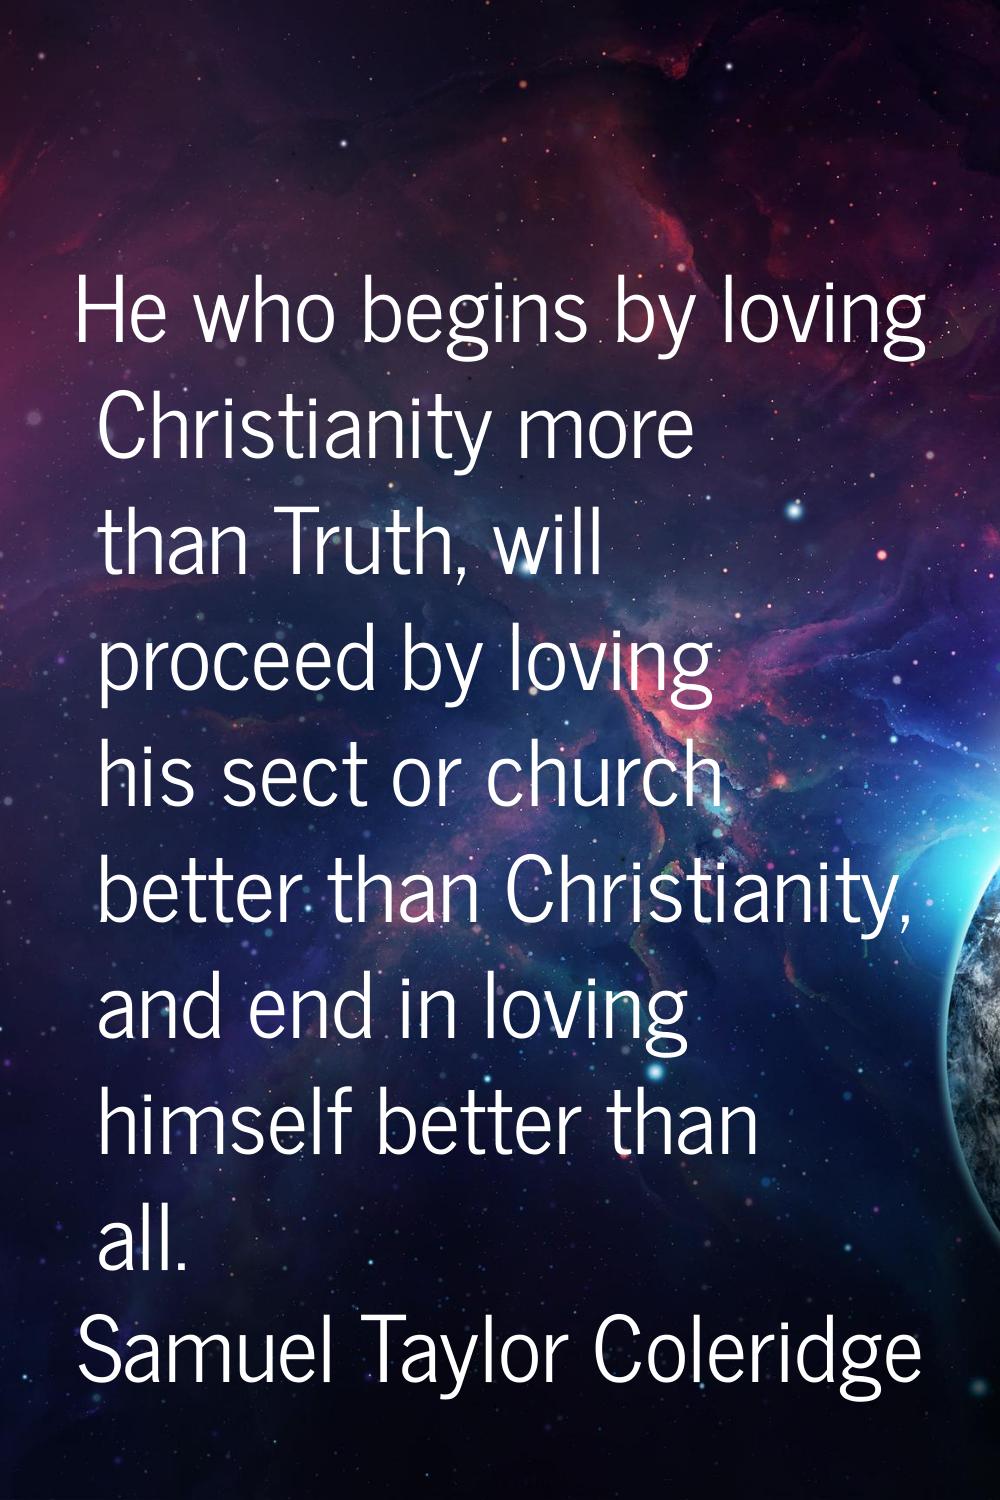 He who begins by loving Christianity more than Truth, will proceed by loving his sect or church bet